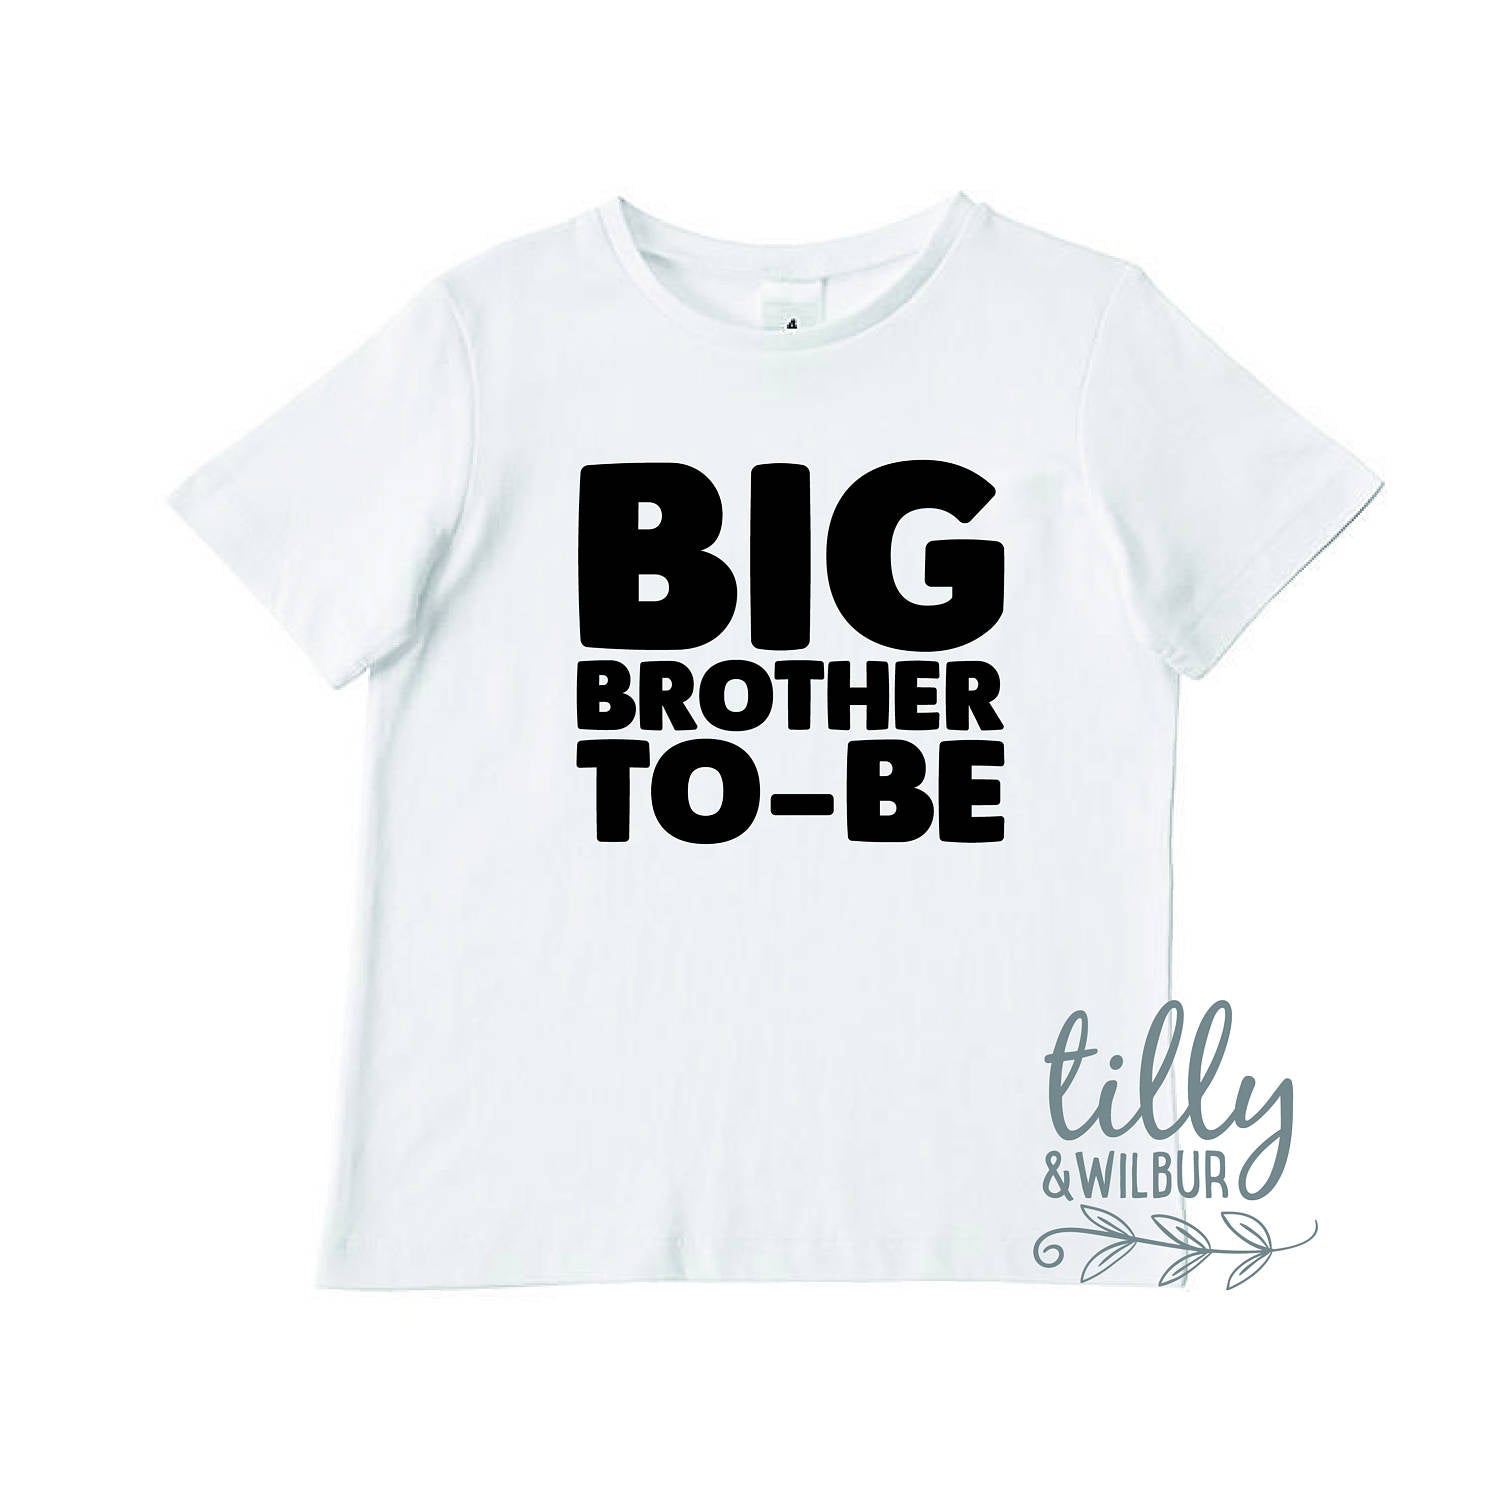 Big Brother To-Be Boys Tee, Big Brother Announcement Shirt, Big Bro Gift, Pregnancy Announcement Shirt, Reveal Outfit, Sibling TShirt, White